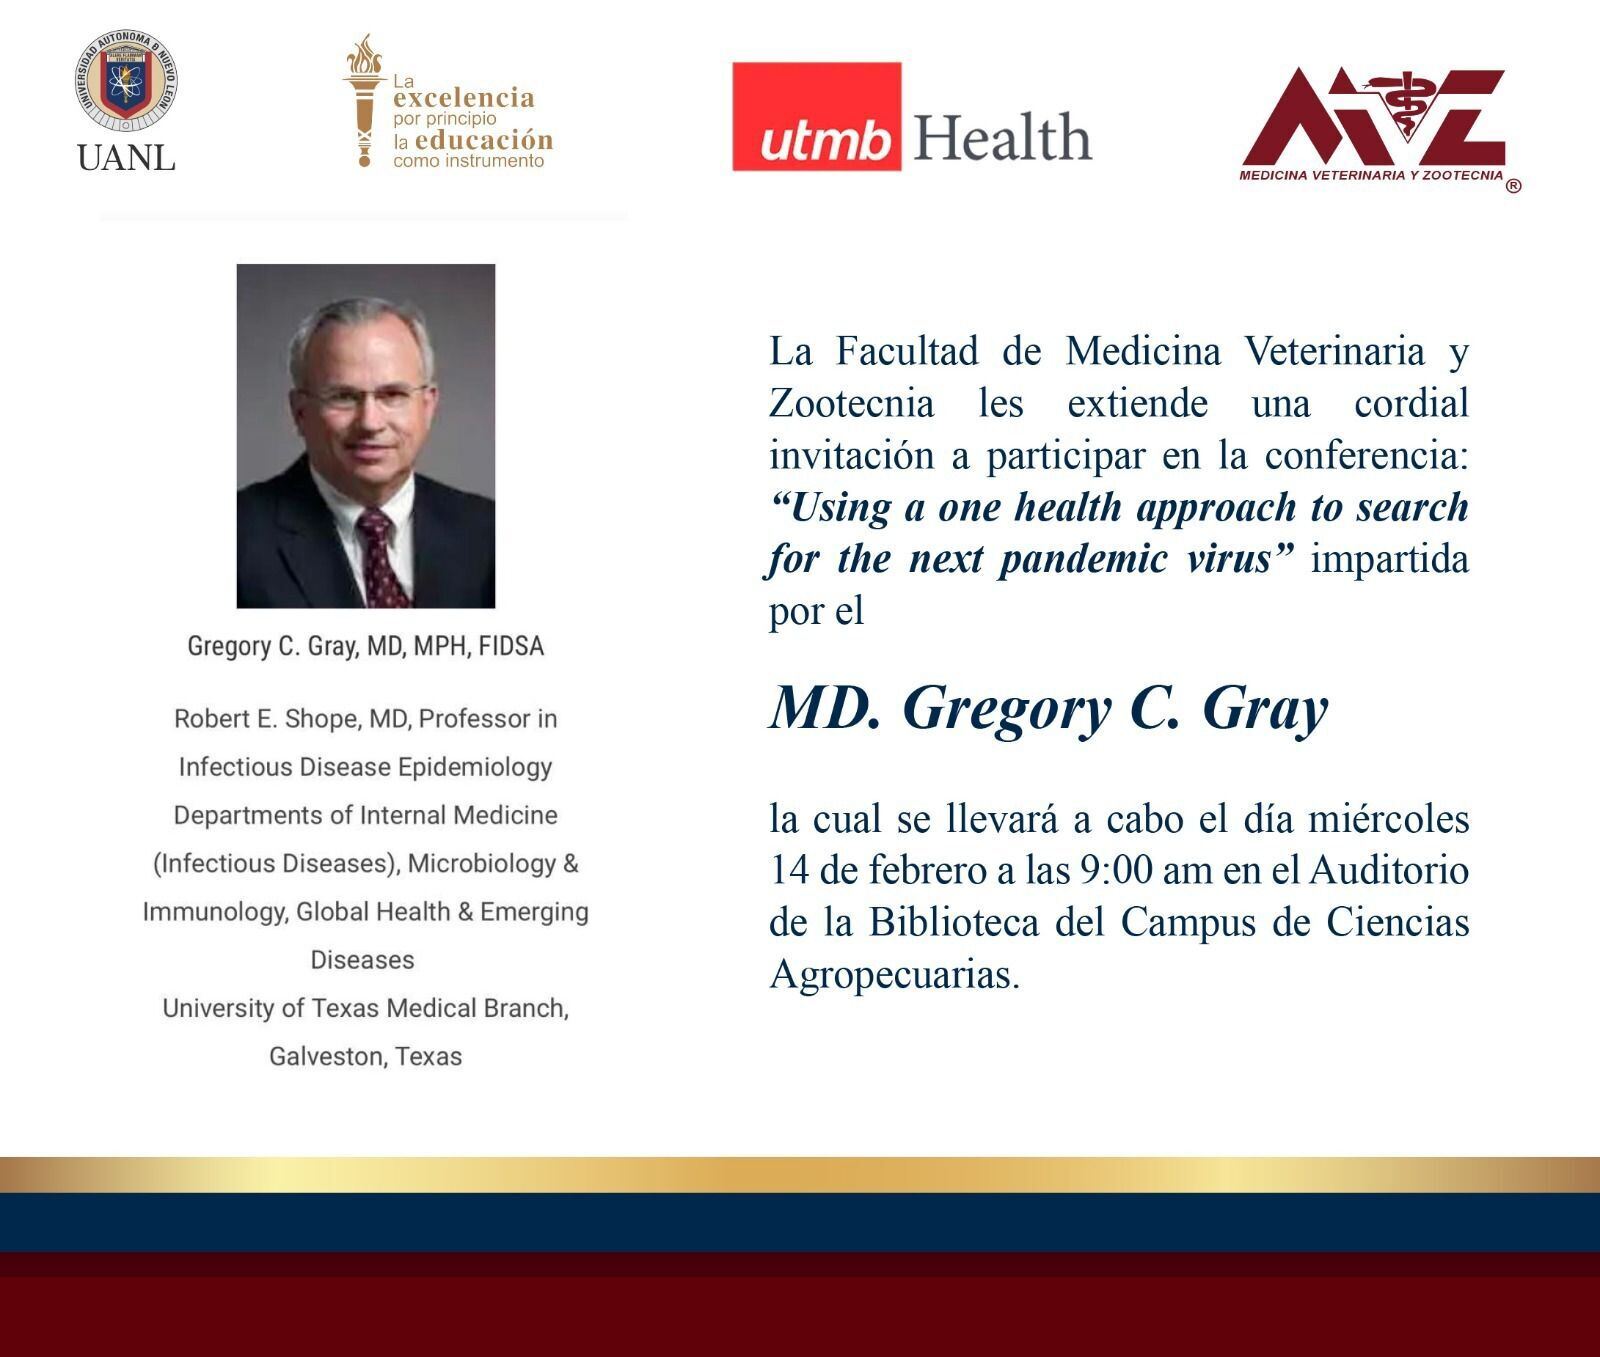 Image of powerpoint slide presenting information about Dr. Gregory Gray